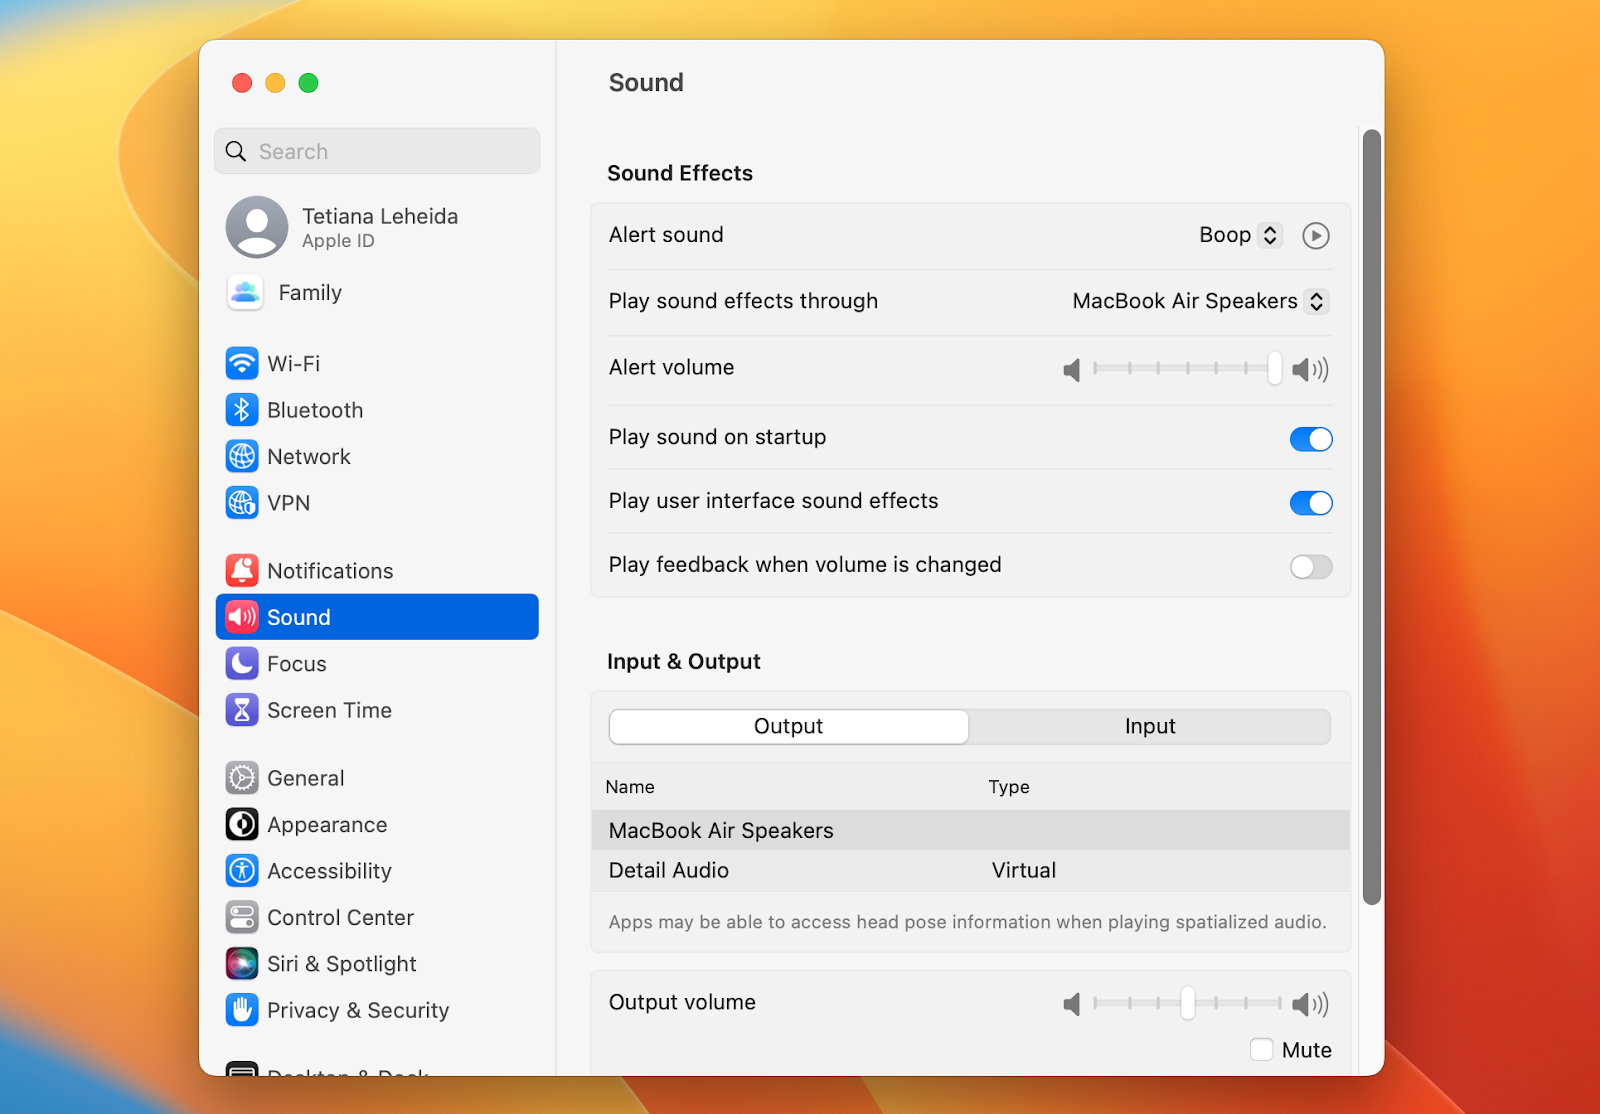 How To Fix The Sound Not Working On Mac